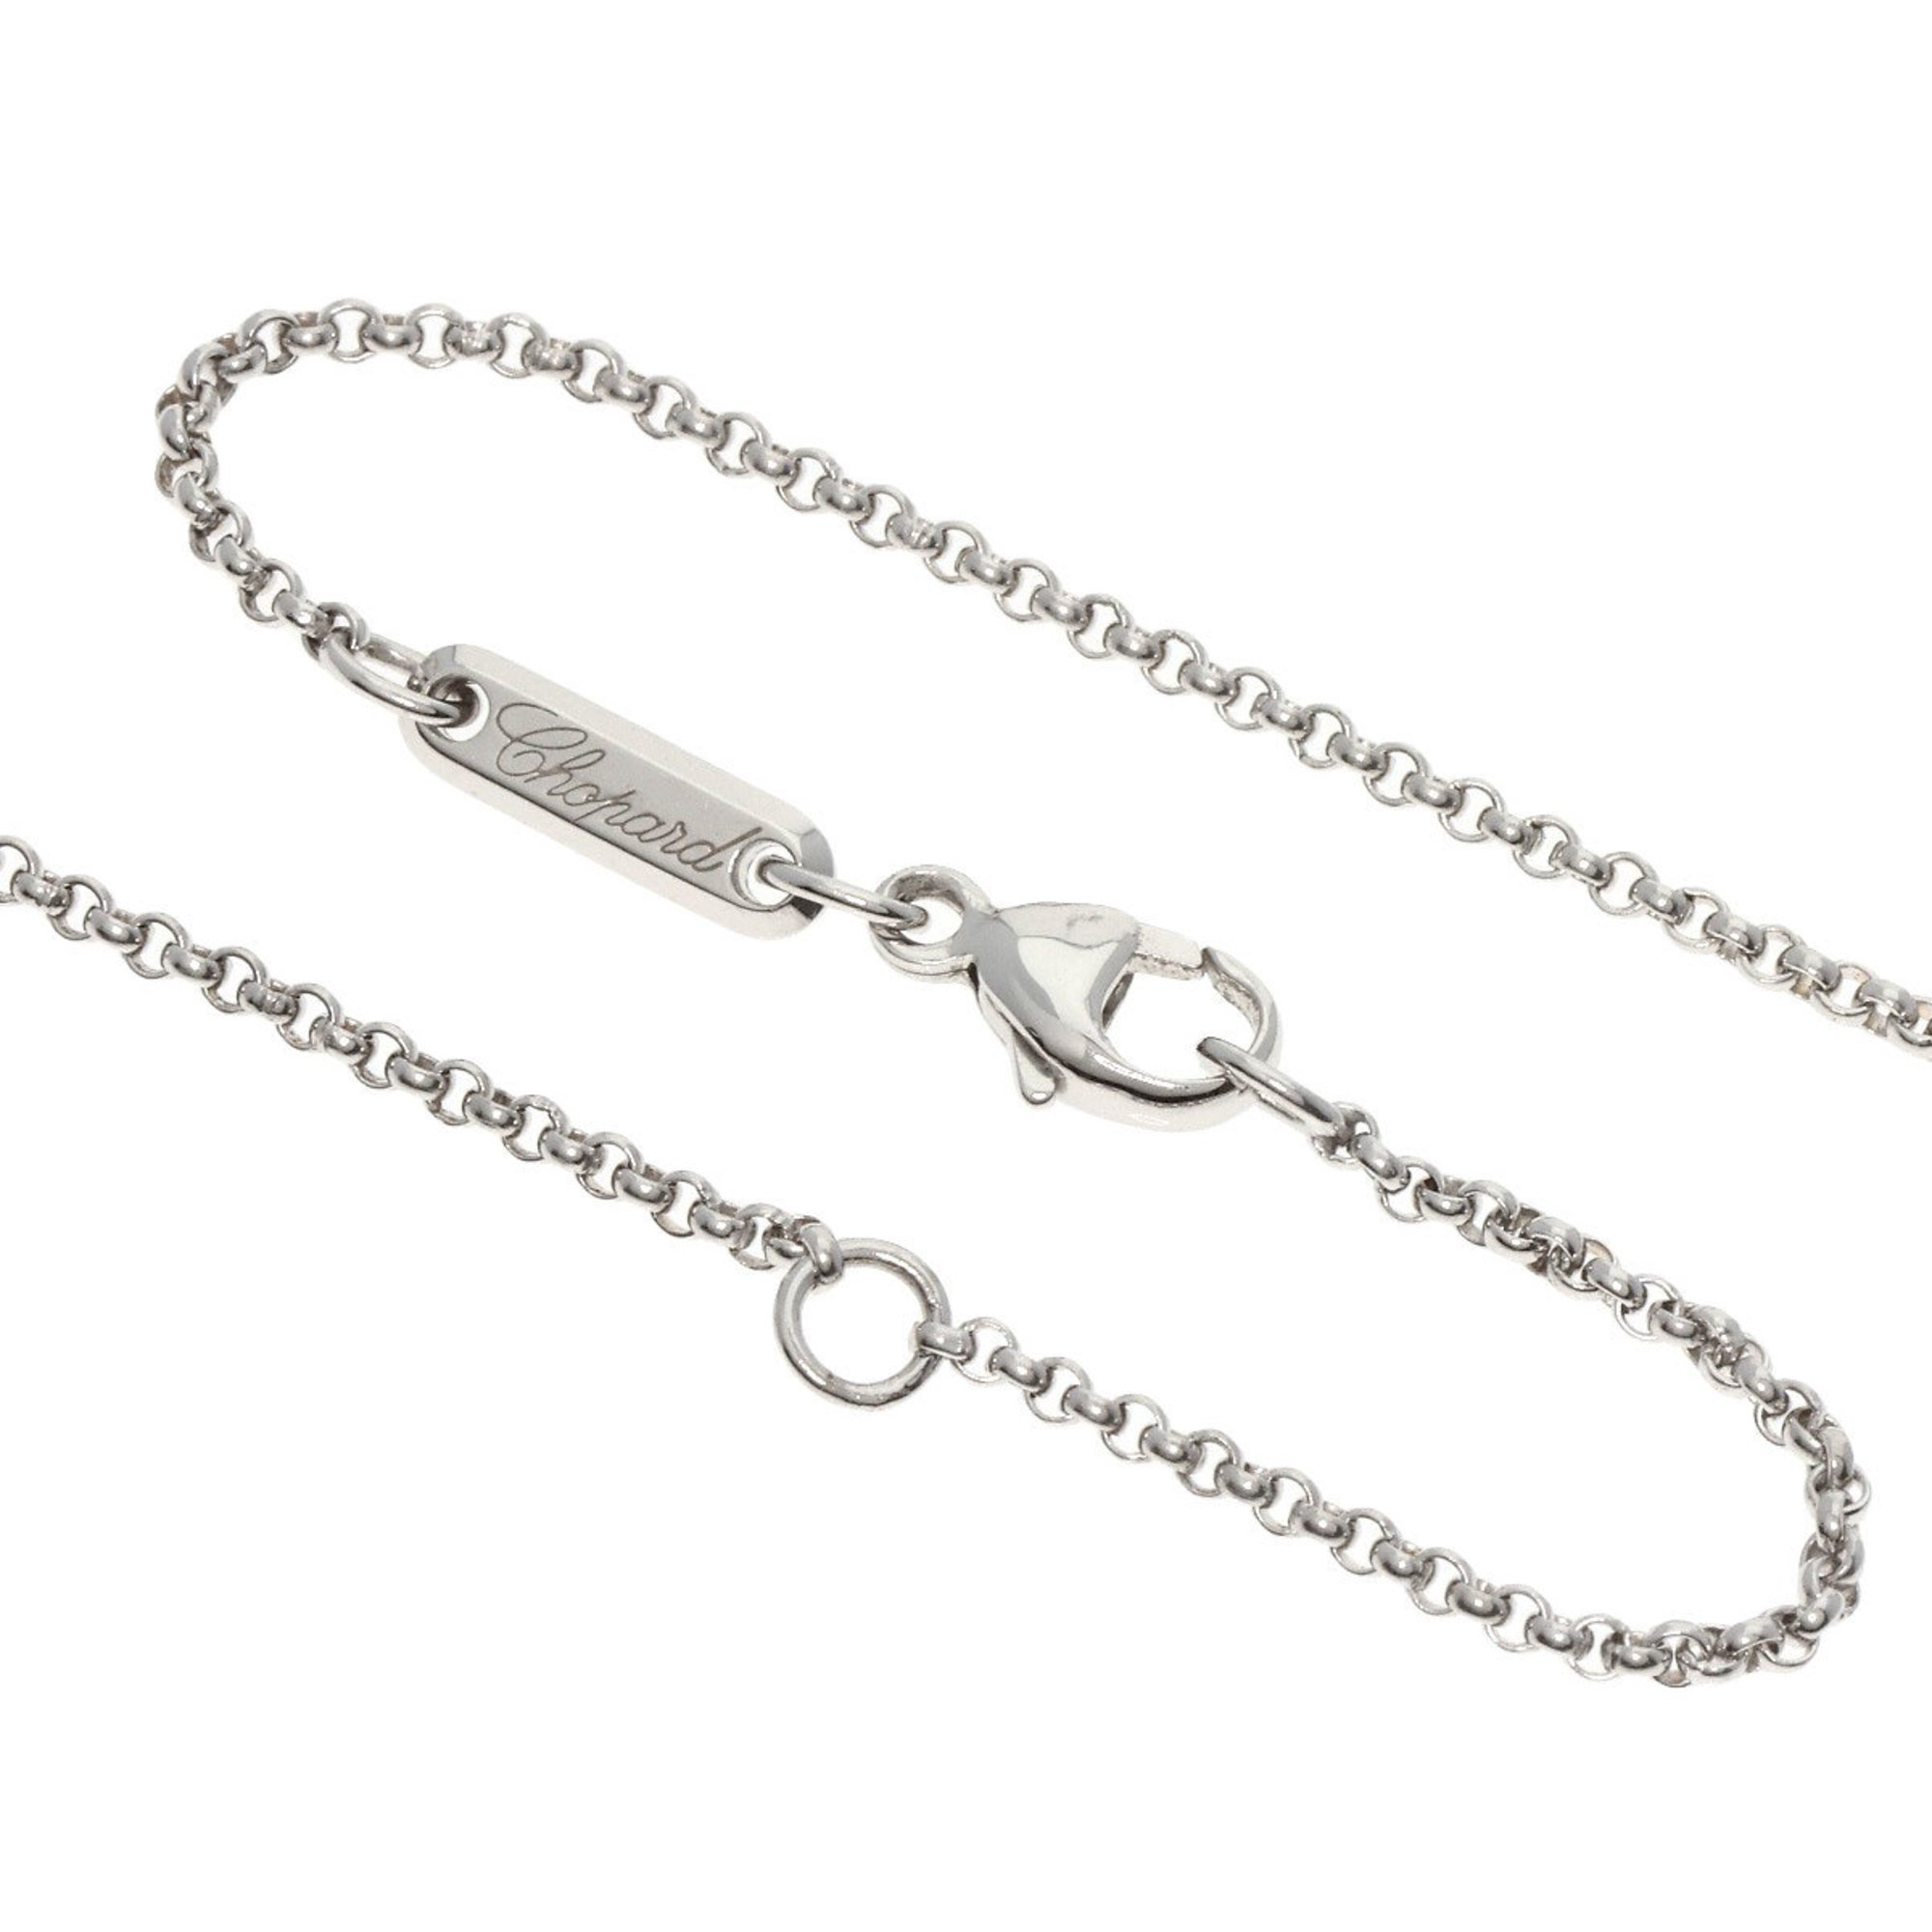 Chopard Dissimo Necklace K18 White Gold Women's